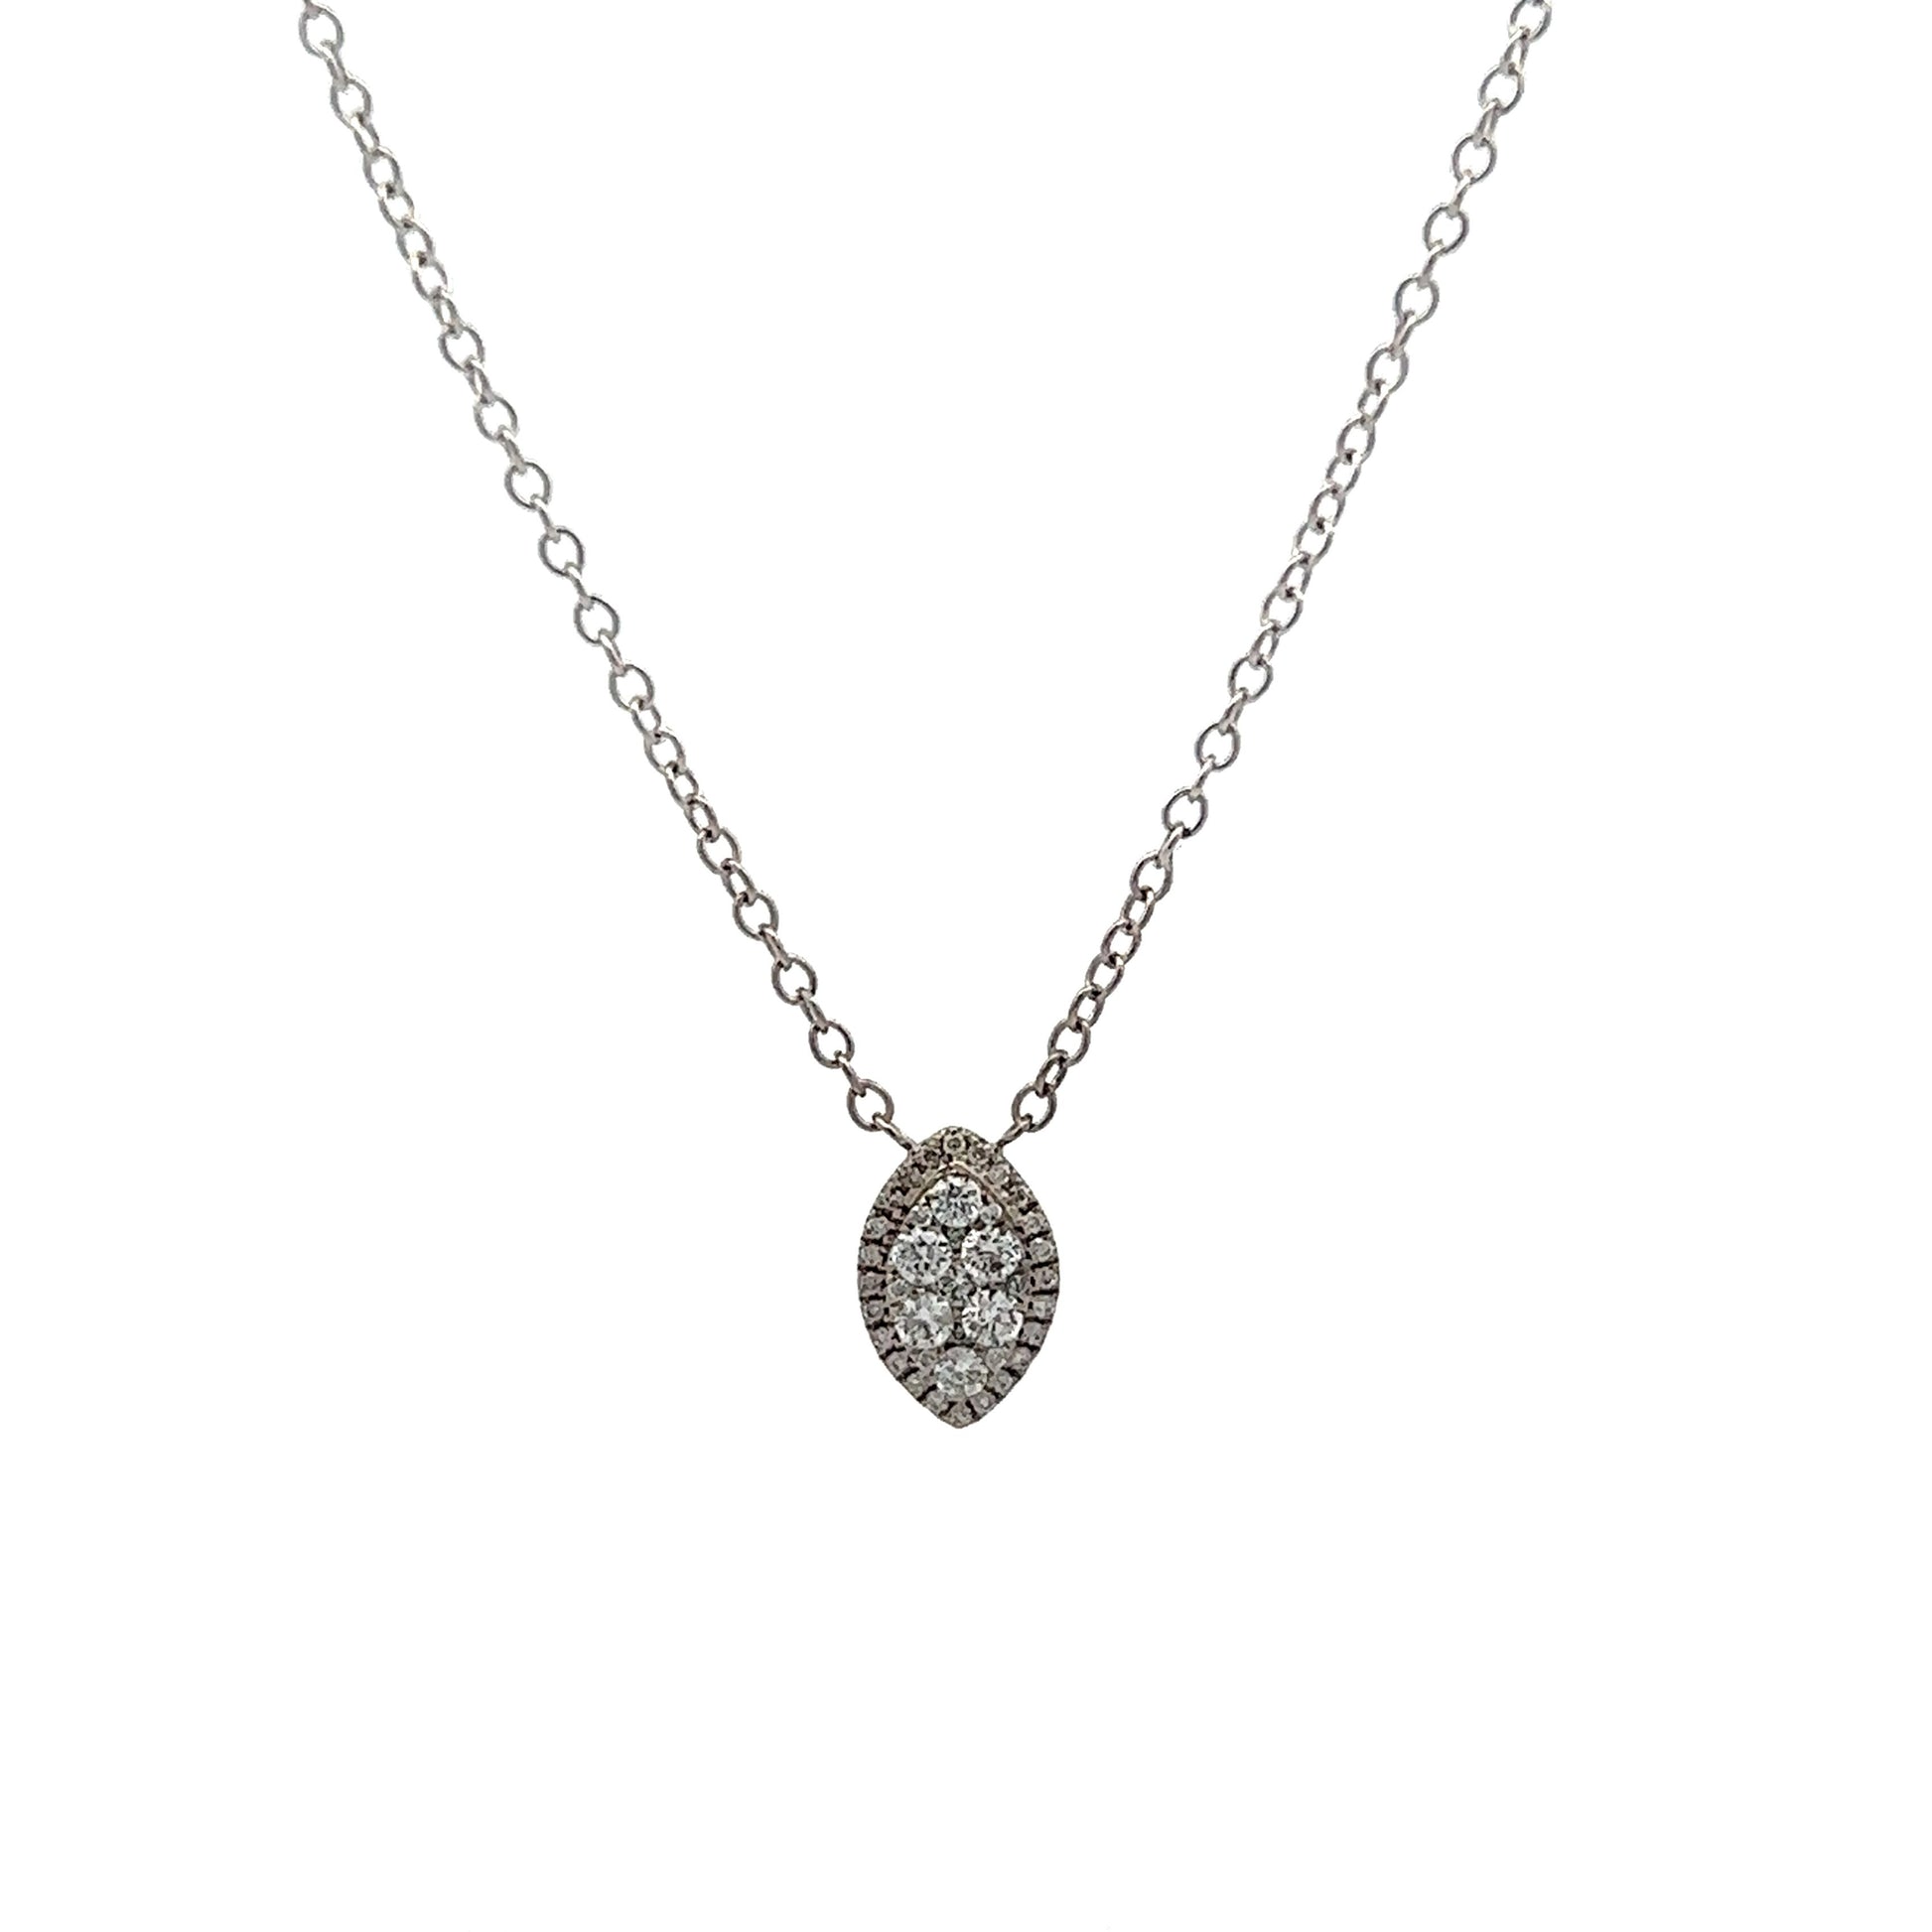 Marquis Shaped Diamond Pendant in 14k White Gold